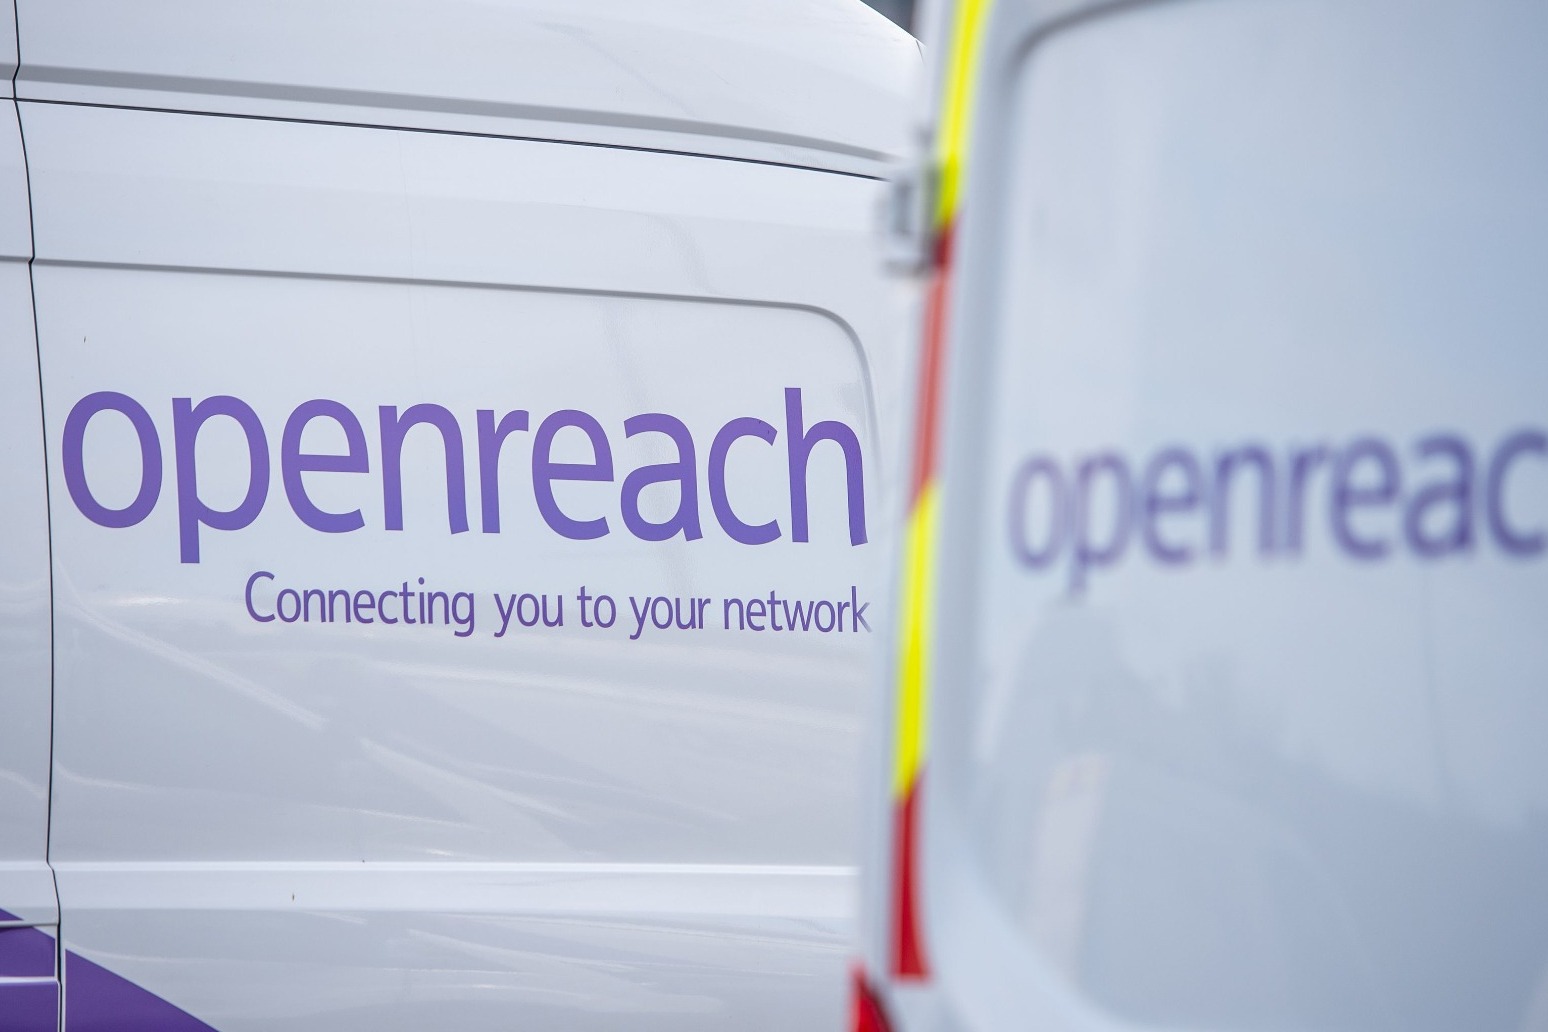 Openreach to create 5,000 new engineering jobs in 2021 